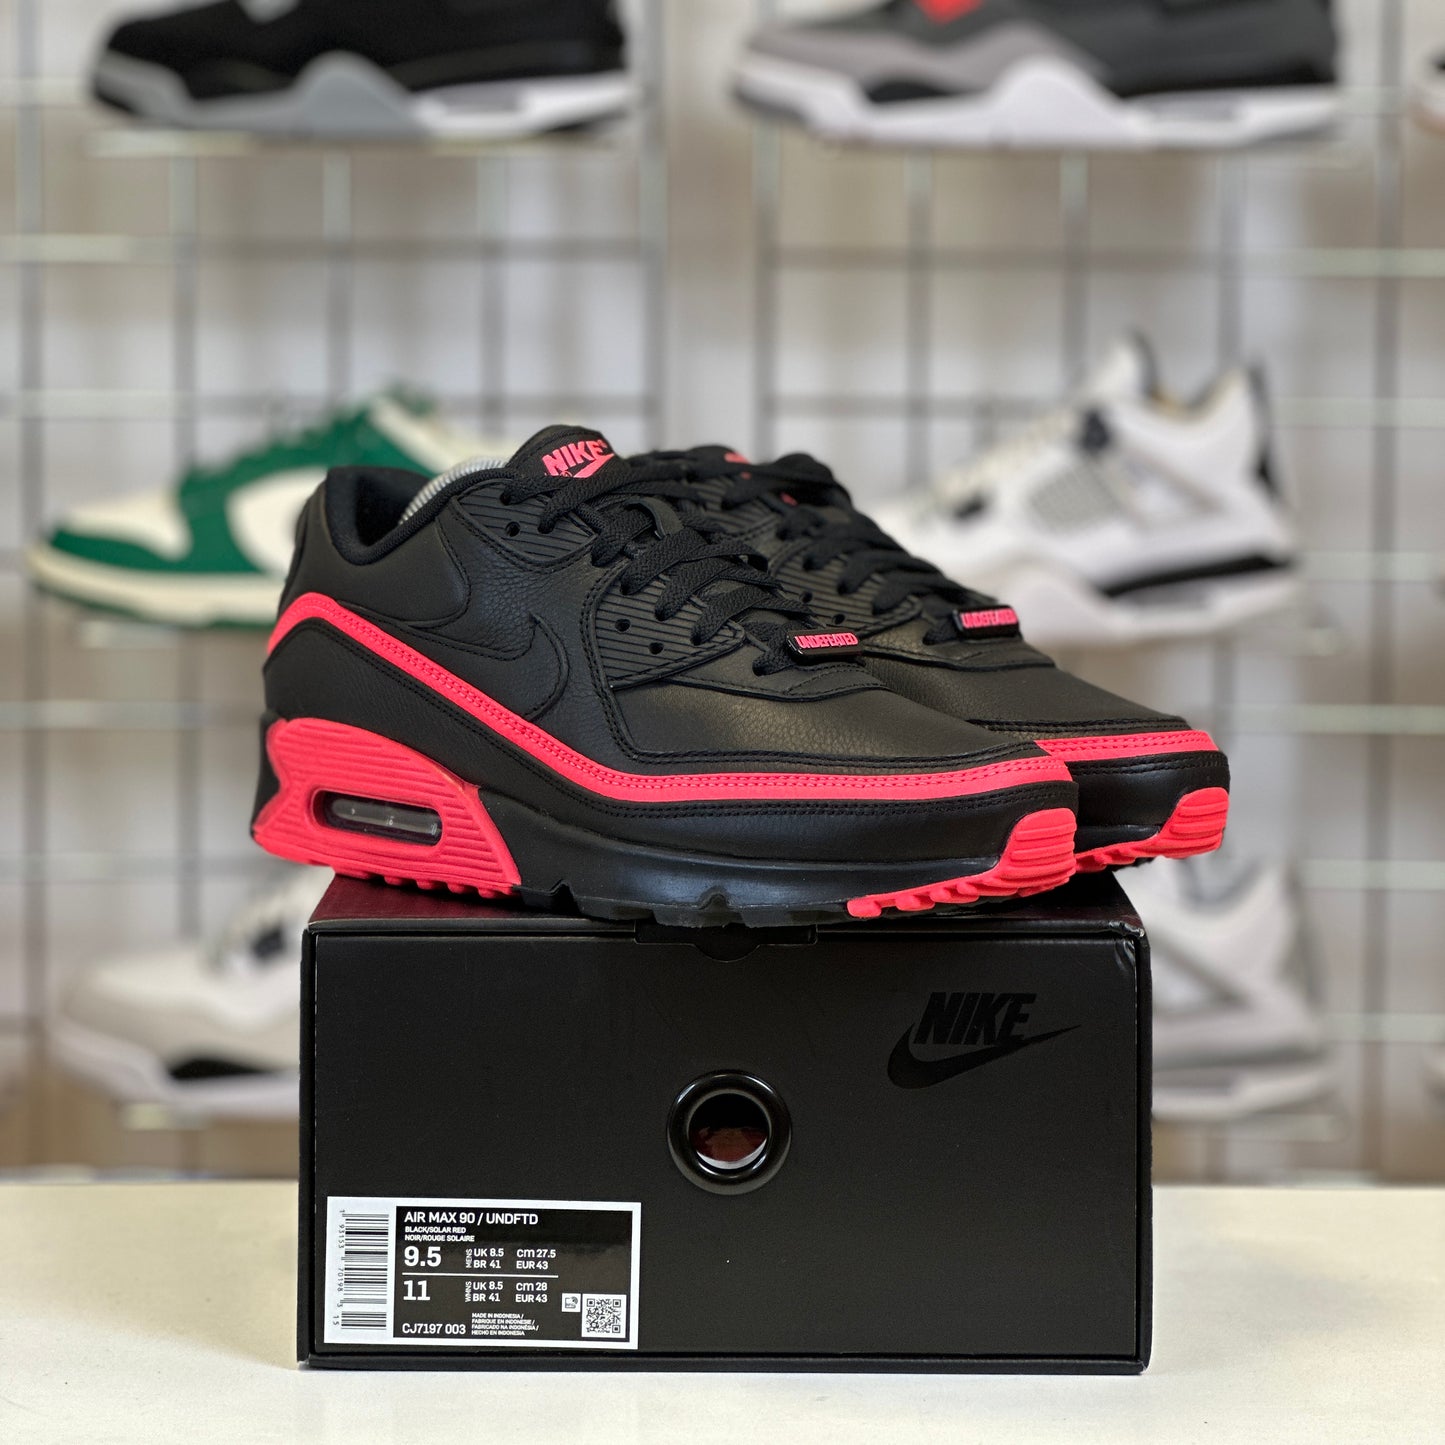 Nike Air Max 90 Undefeated 'Black Solar Red' UK8.5